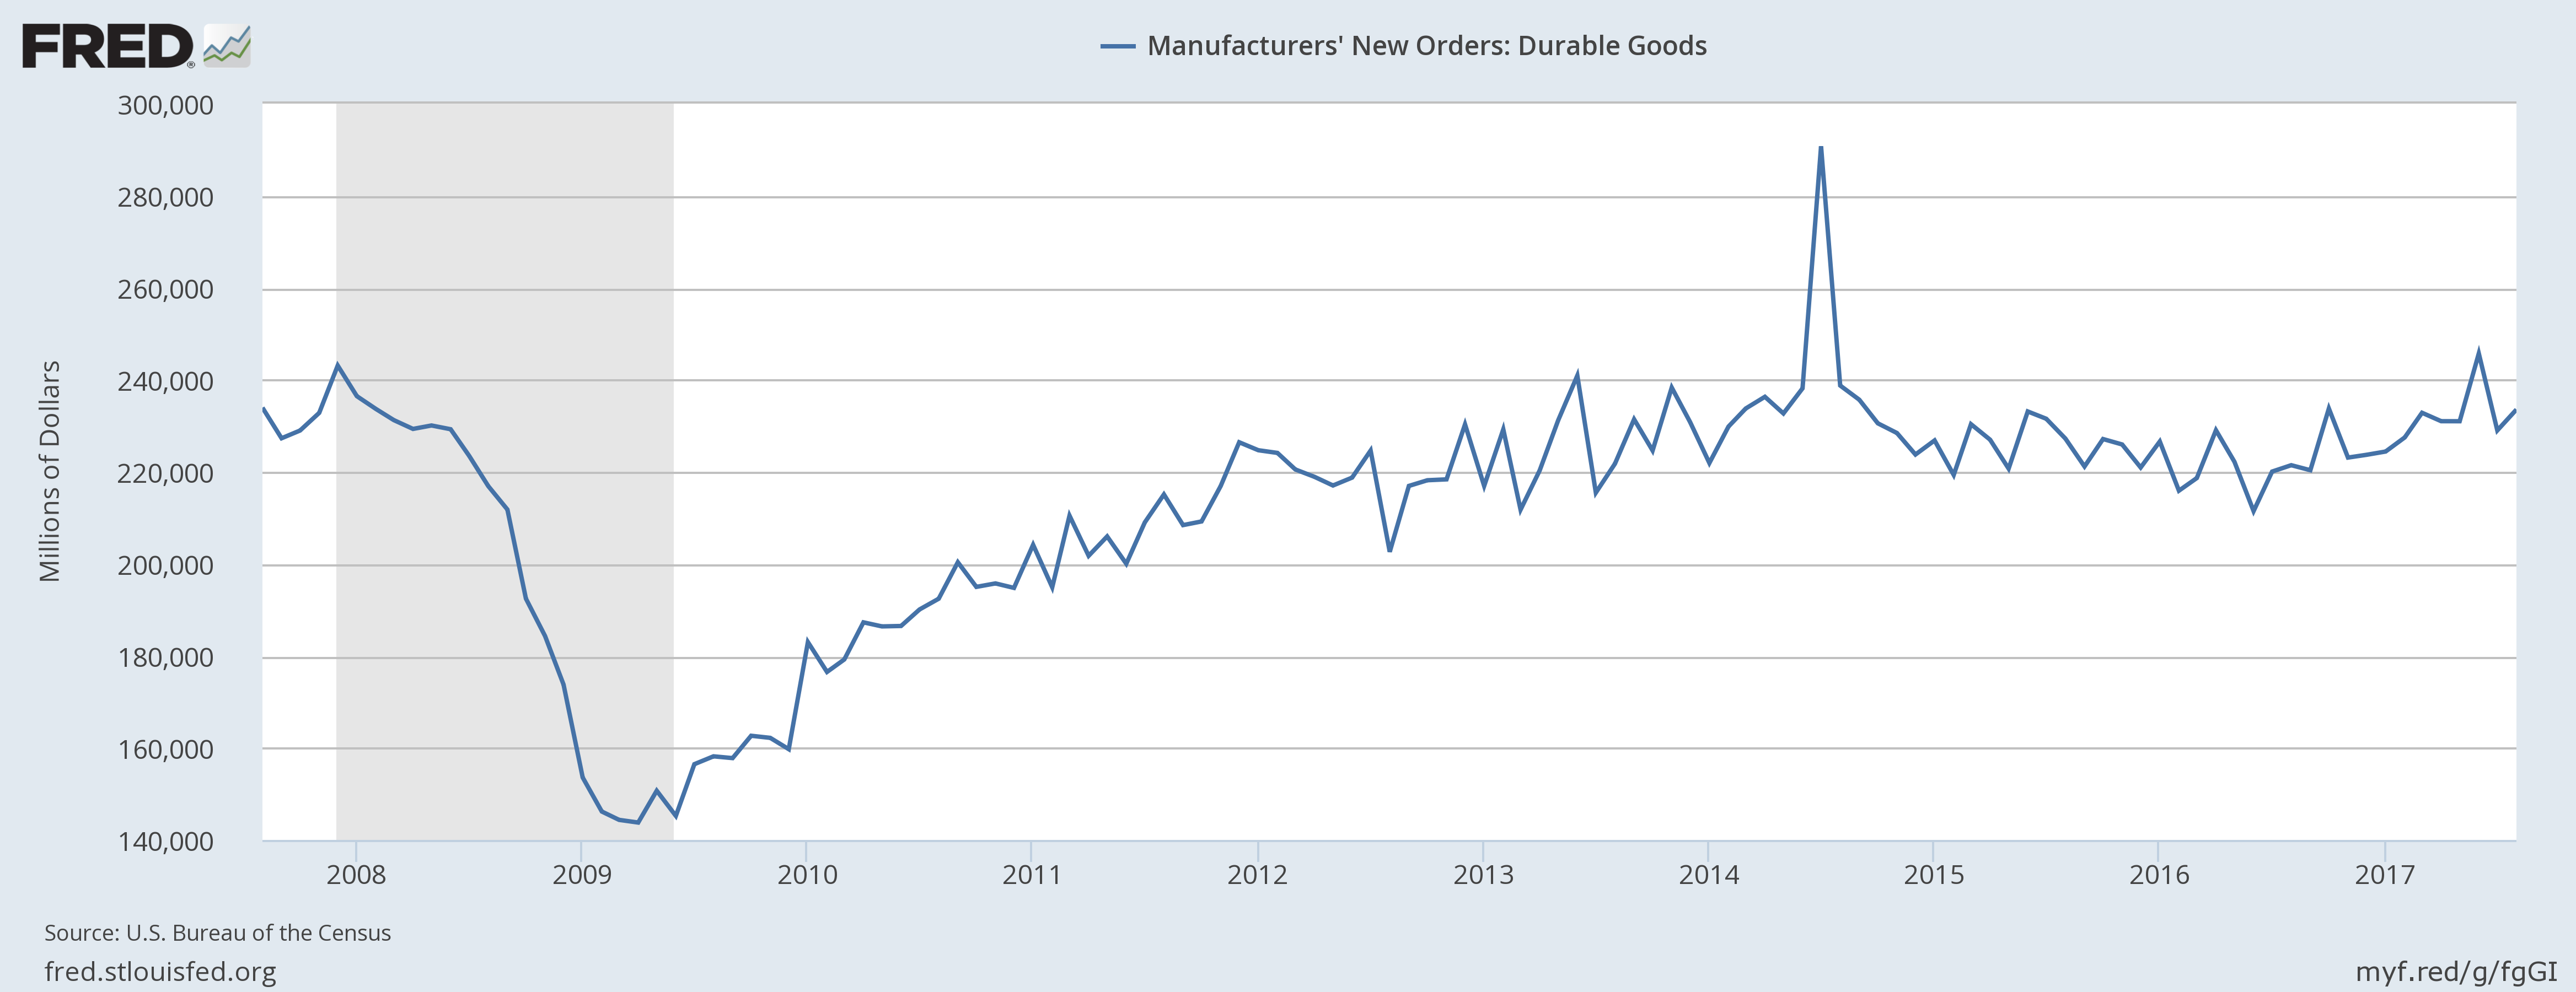 Manufactuers New Orders Durable Goods